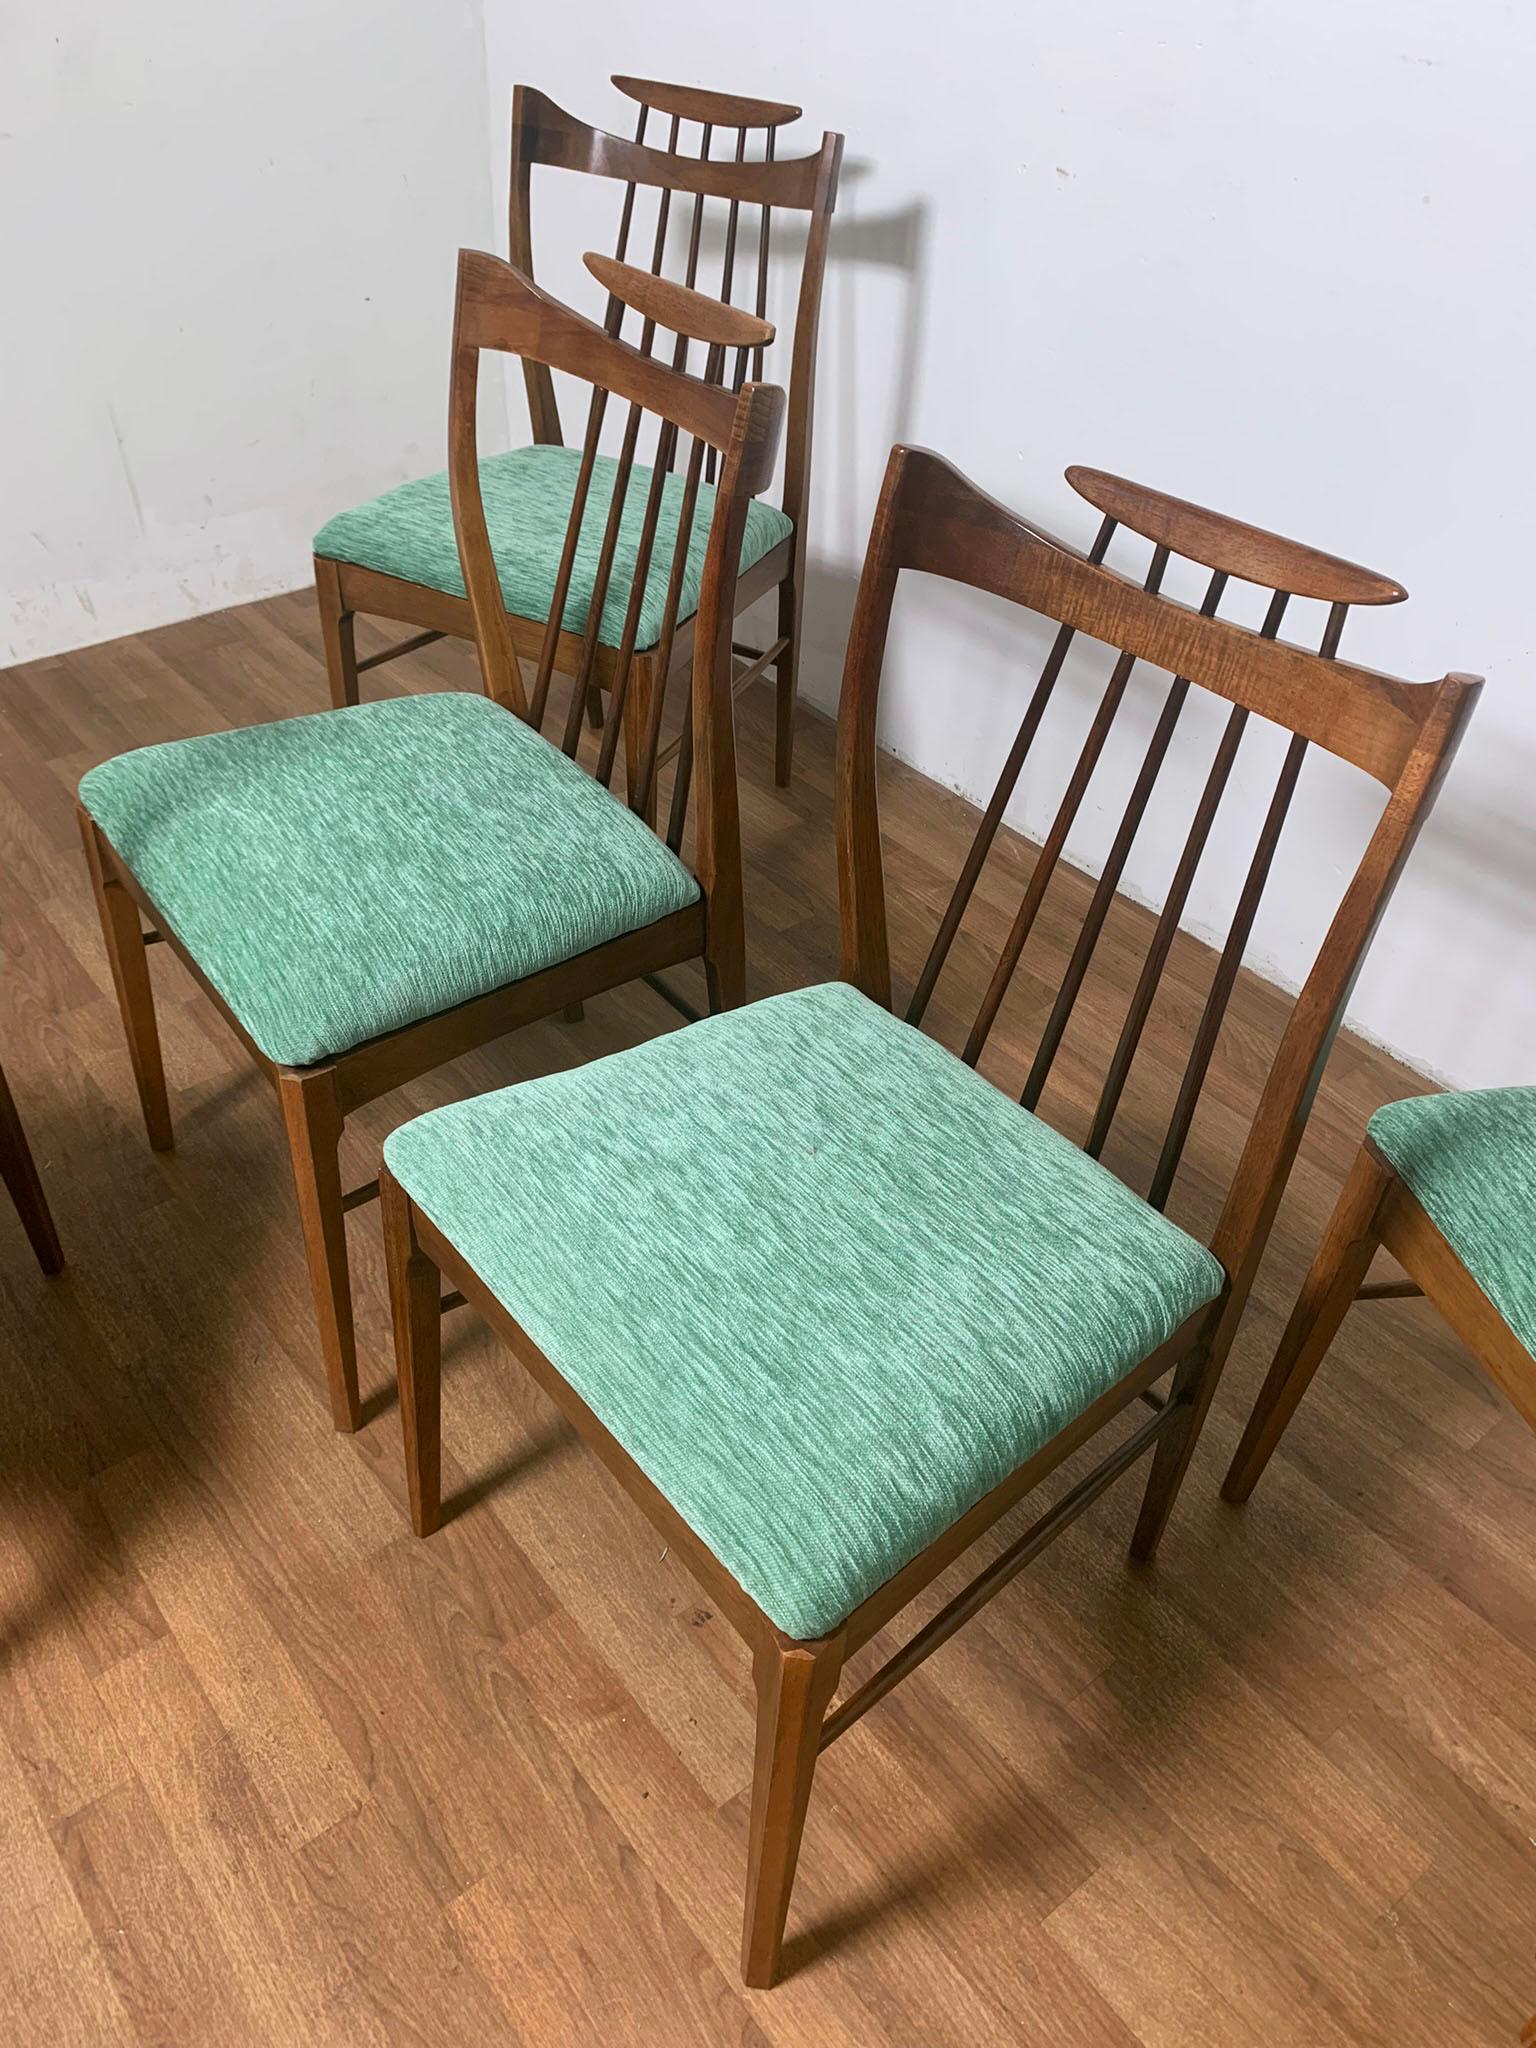 A set of six stylized walnut dining chairs by the American furniture maker Thomasville, ca. 1958.

Armchairs measure 24” wide, 22” deep, 33” high, seat height 17.5”.
Side chairs measure 18.5” wide, 22” deep, 33” high, seat height 17.5”.

